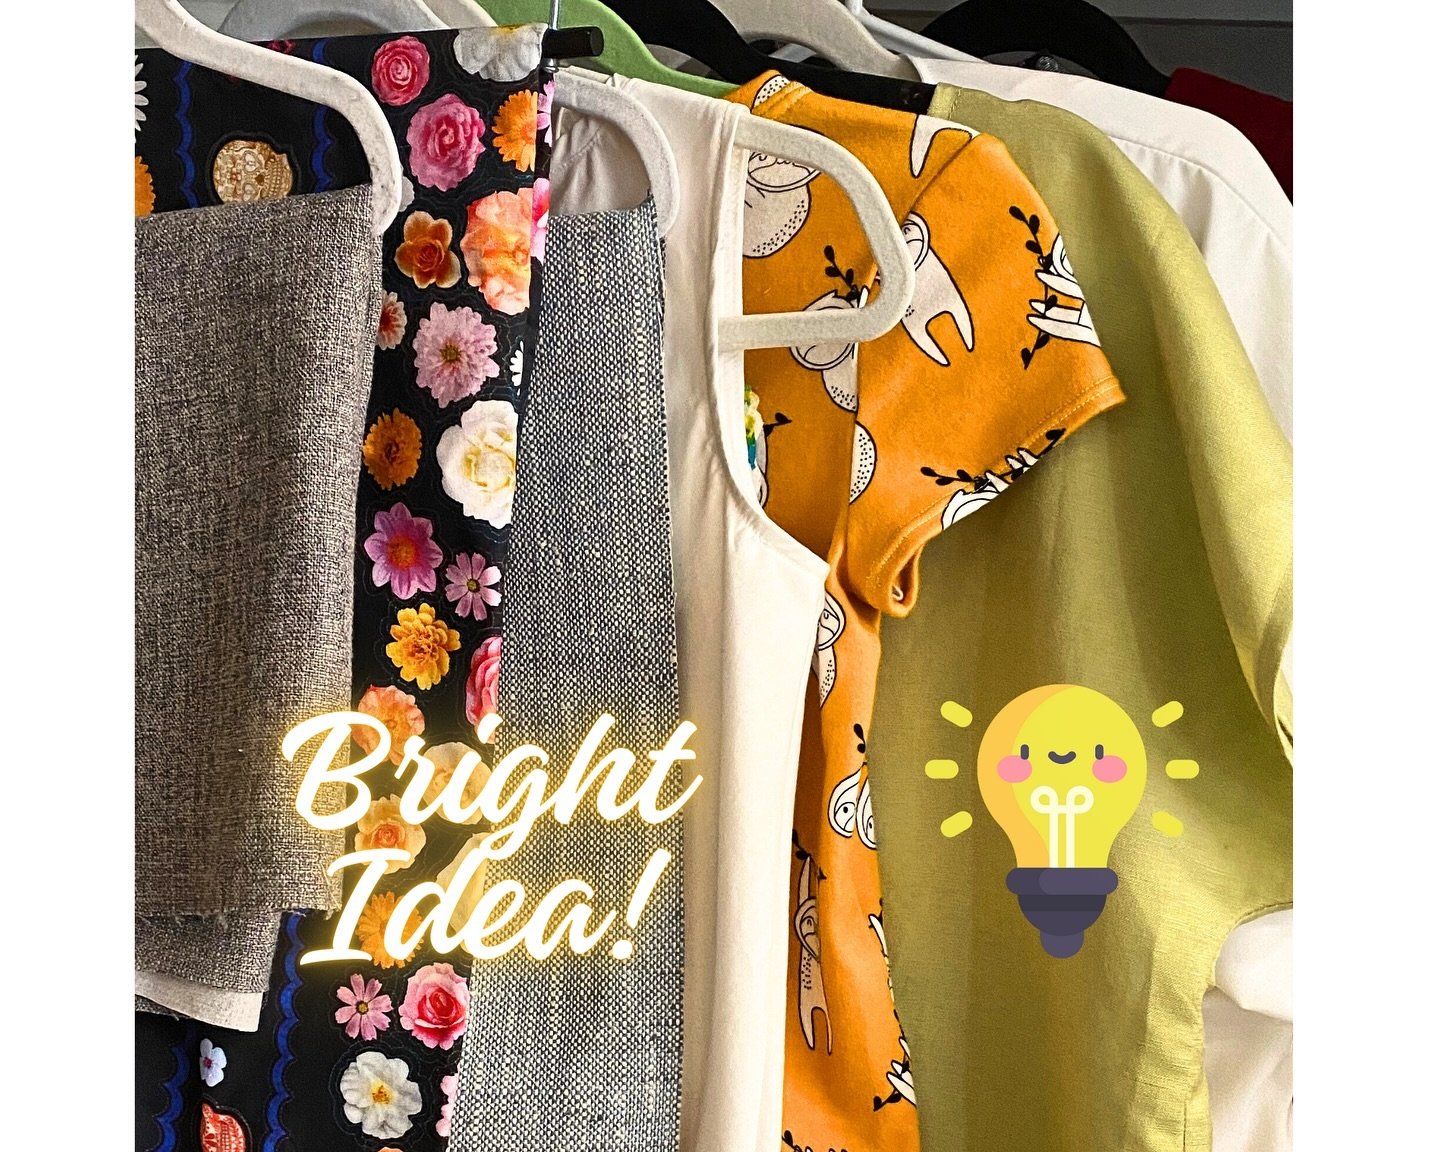 Find inspiration from your own closet by hanging unused fabrics among your clothes. Watch the ideas flow! Come and take one of our garment courses! #sewingclothes #lovesewing #columbussewingclasses #thebestsewingschool 💖